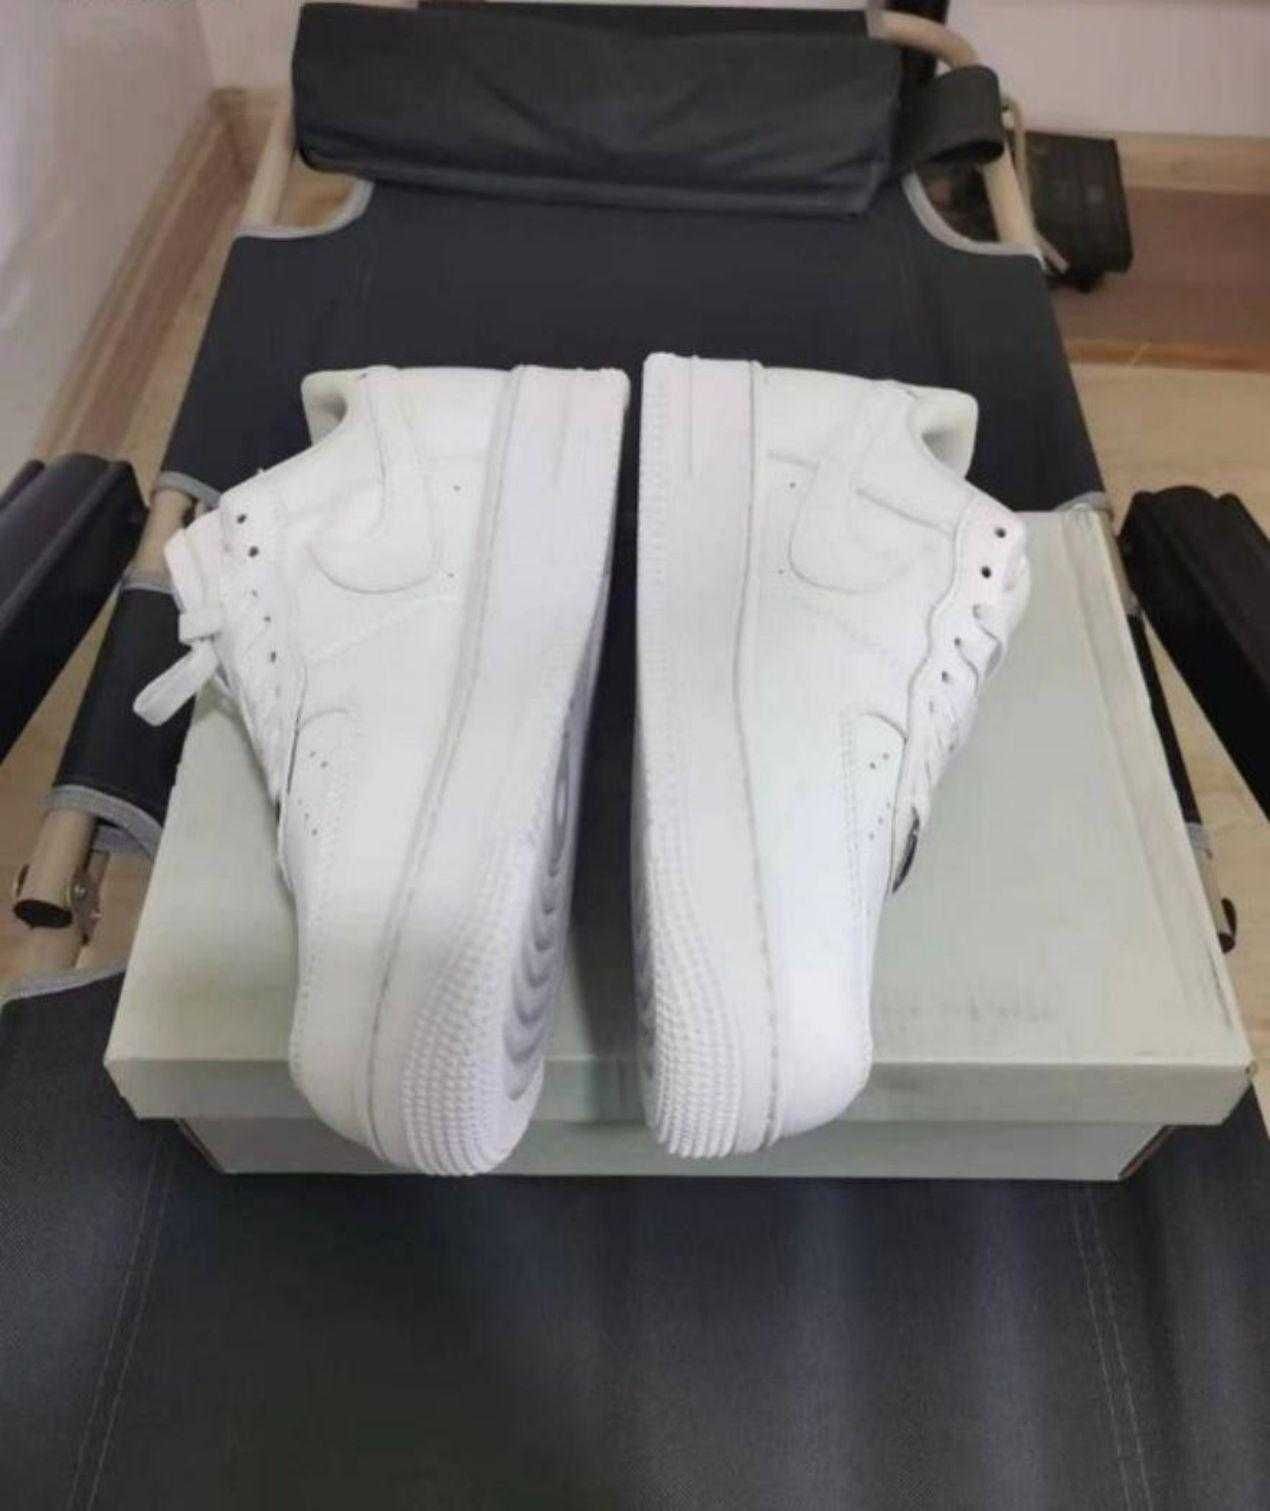 Nike Air Force 1 Low‘07 White  43